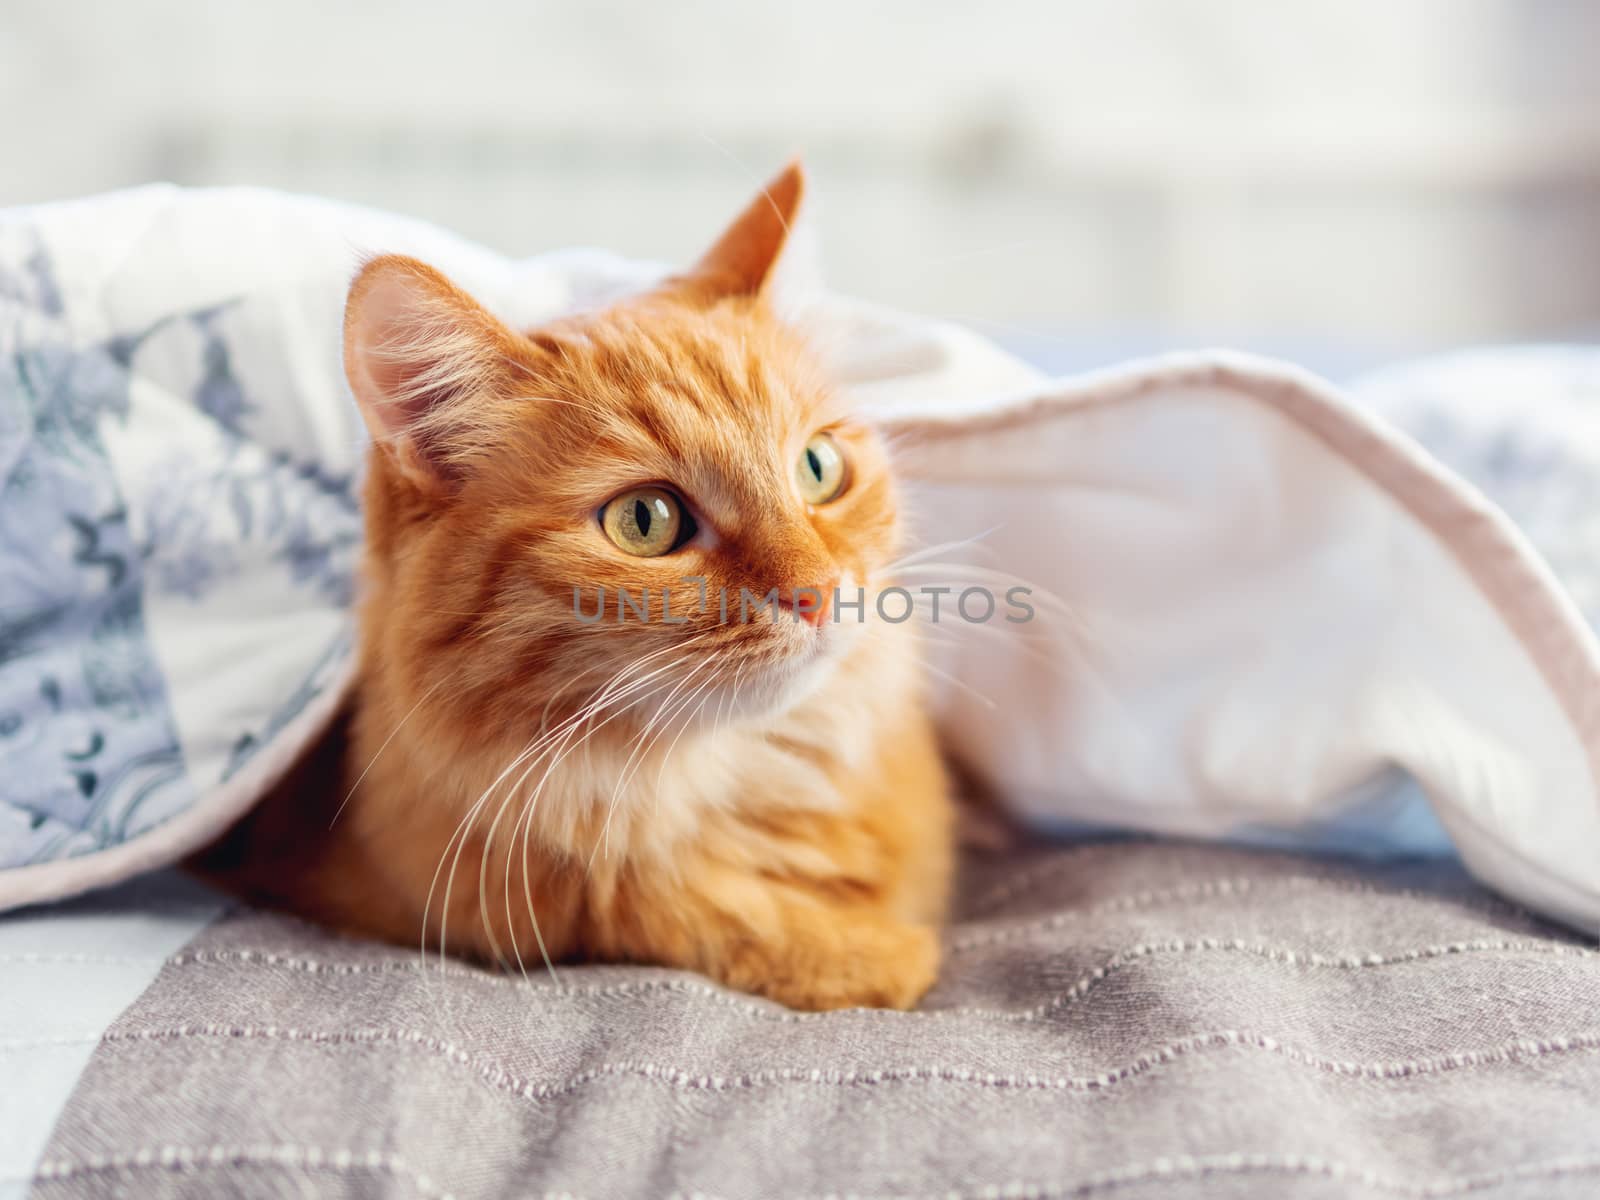 Cute ginger cat is hiding under blanket. Fluffy pet with funny face expression. Cozy home background.